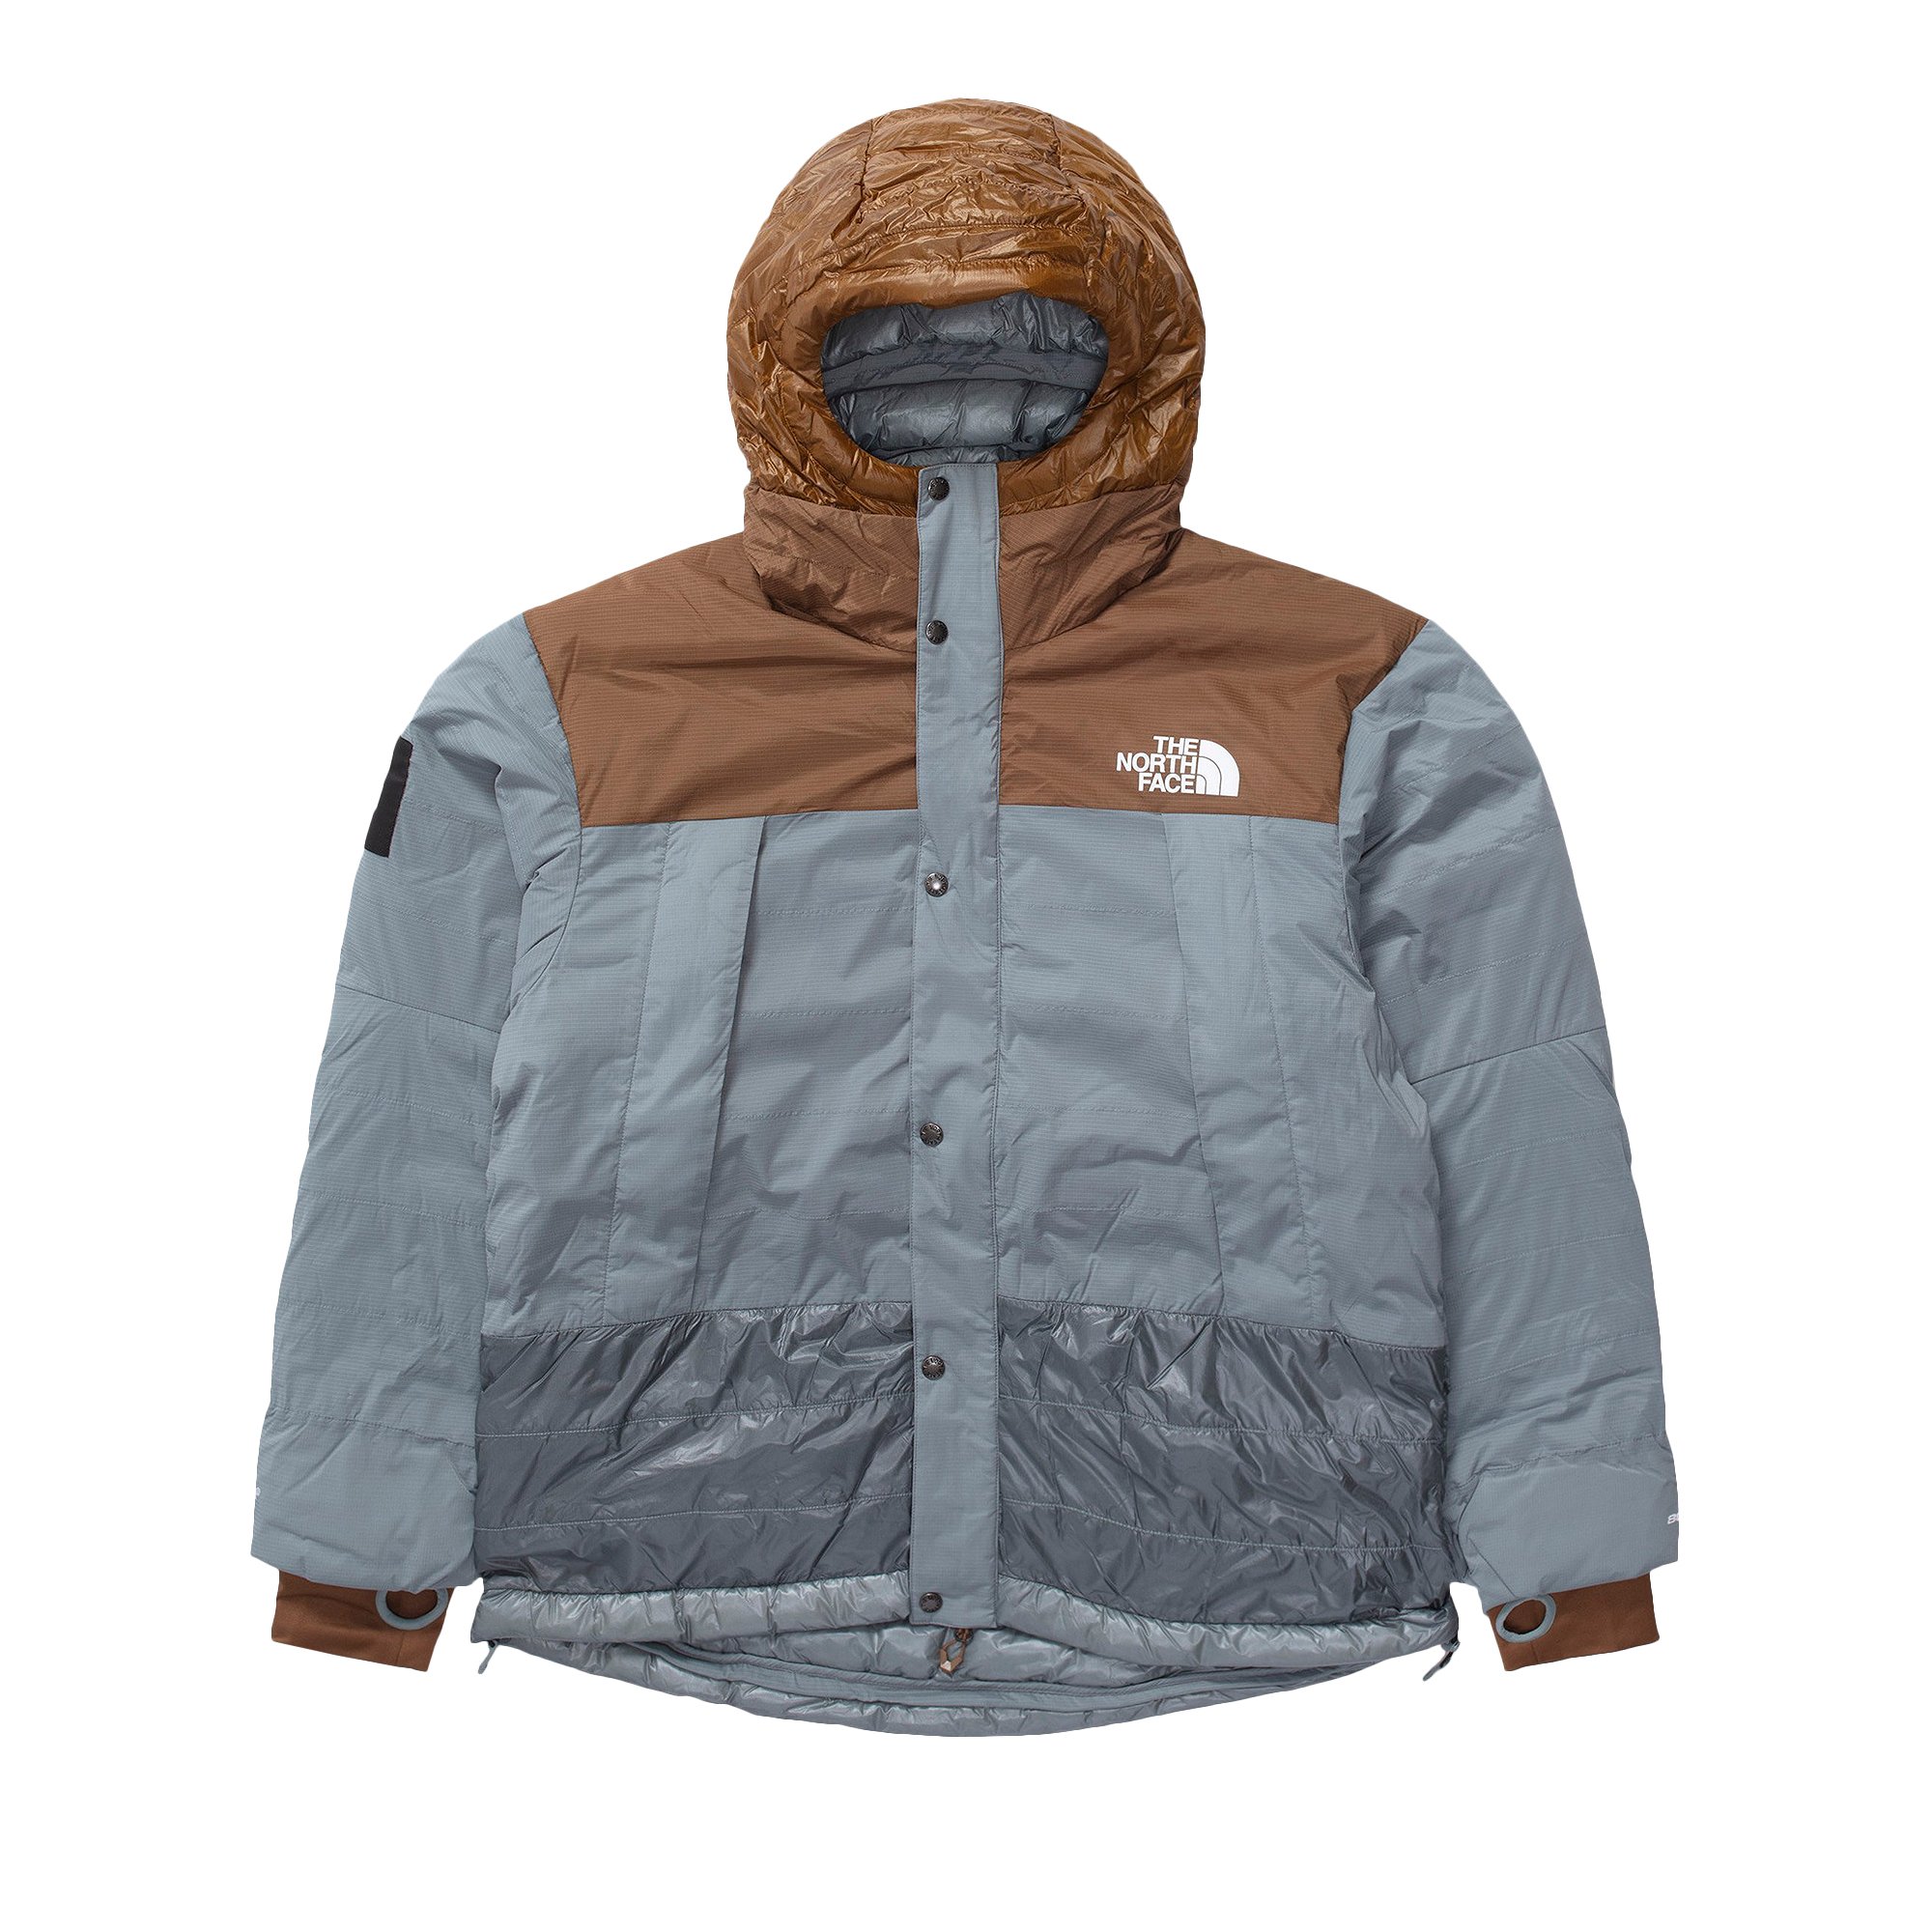 The North Face x Undercover Soukuu 50/50 Jacket 'Sepia Brown/Concrete Grey'